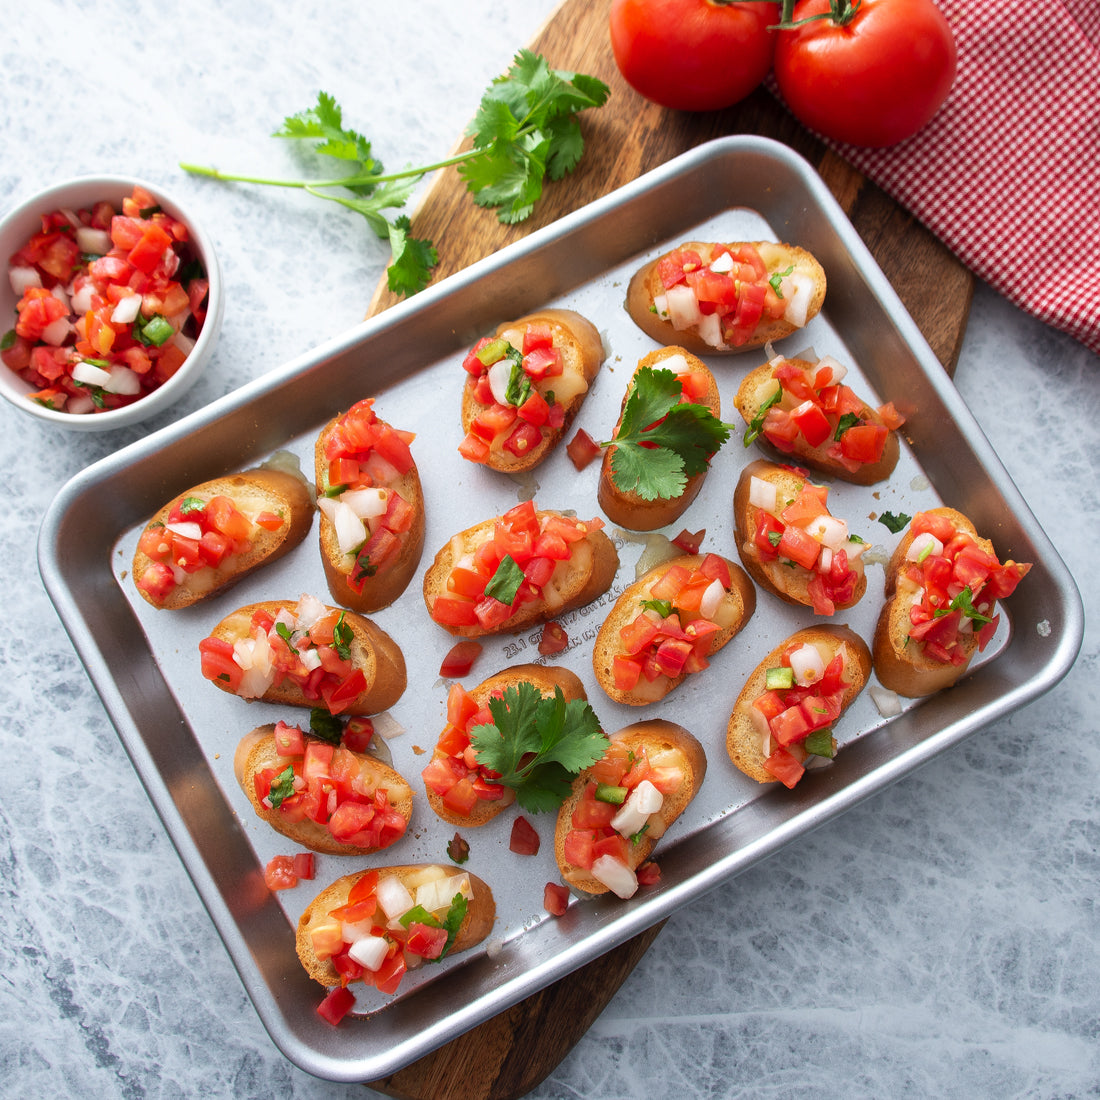 Quarter Sheet Pan full of baguette slices topped with diced tomatoes.